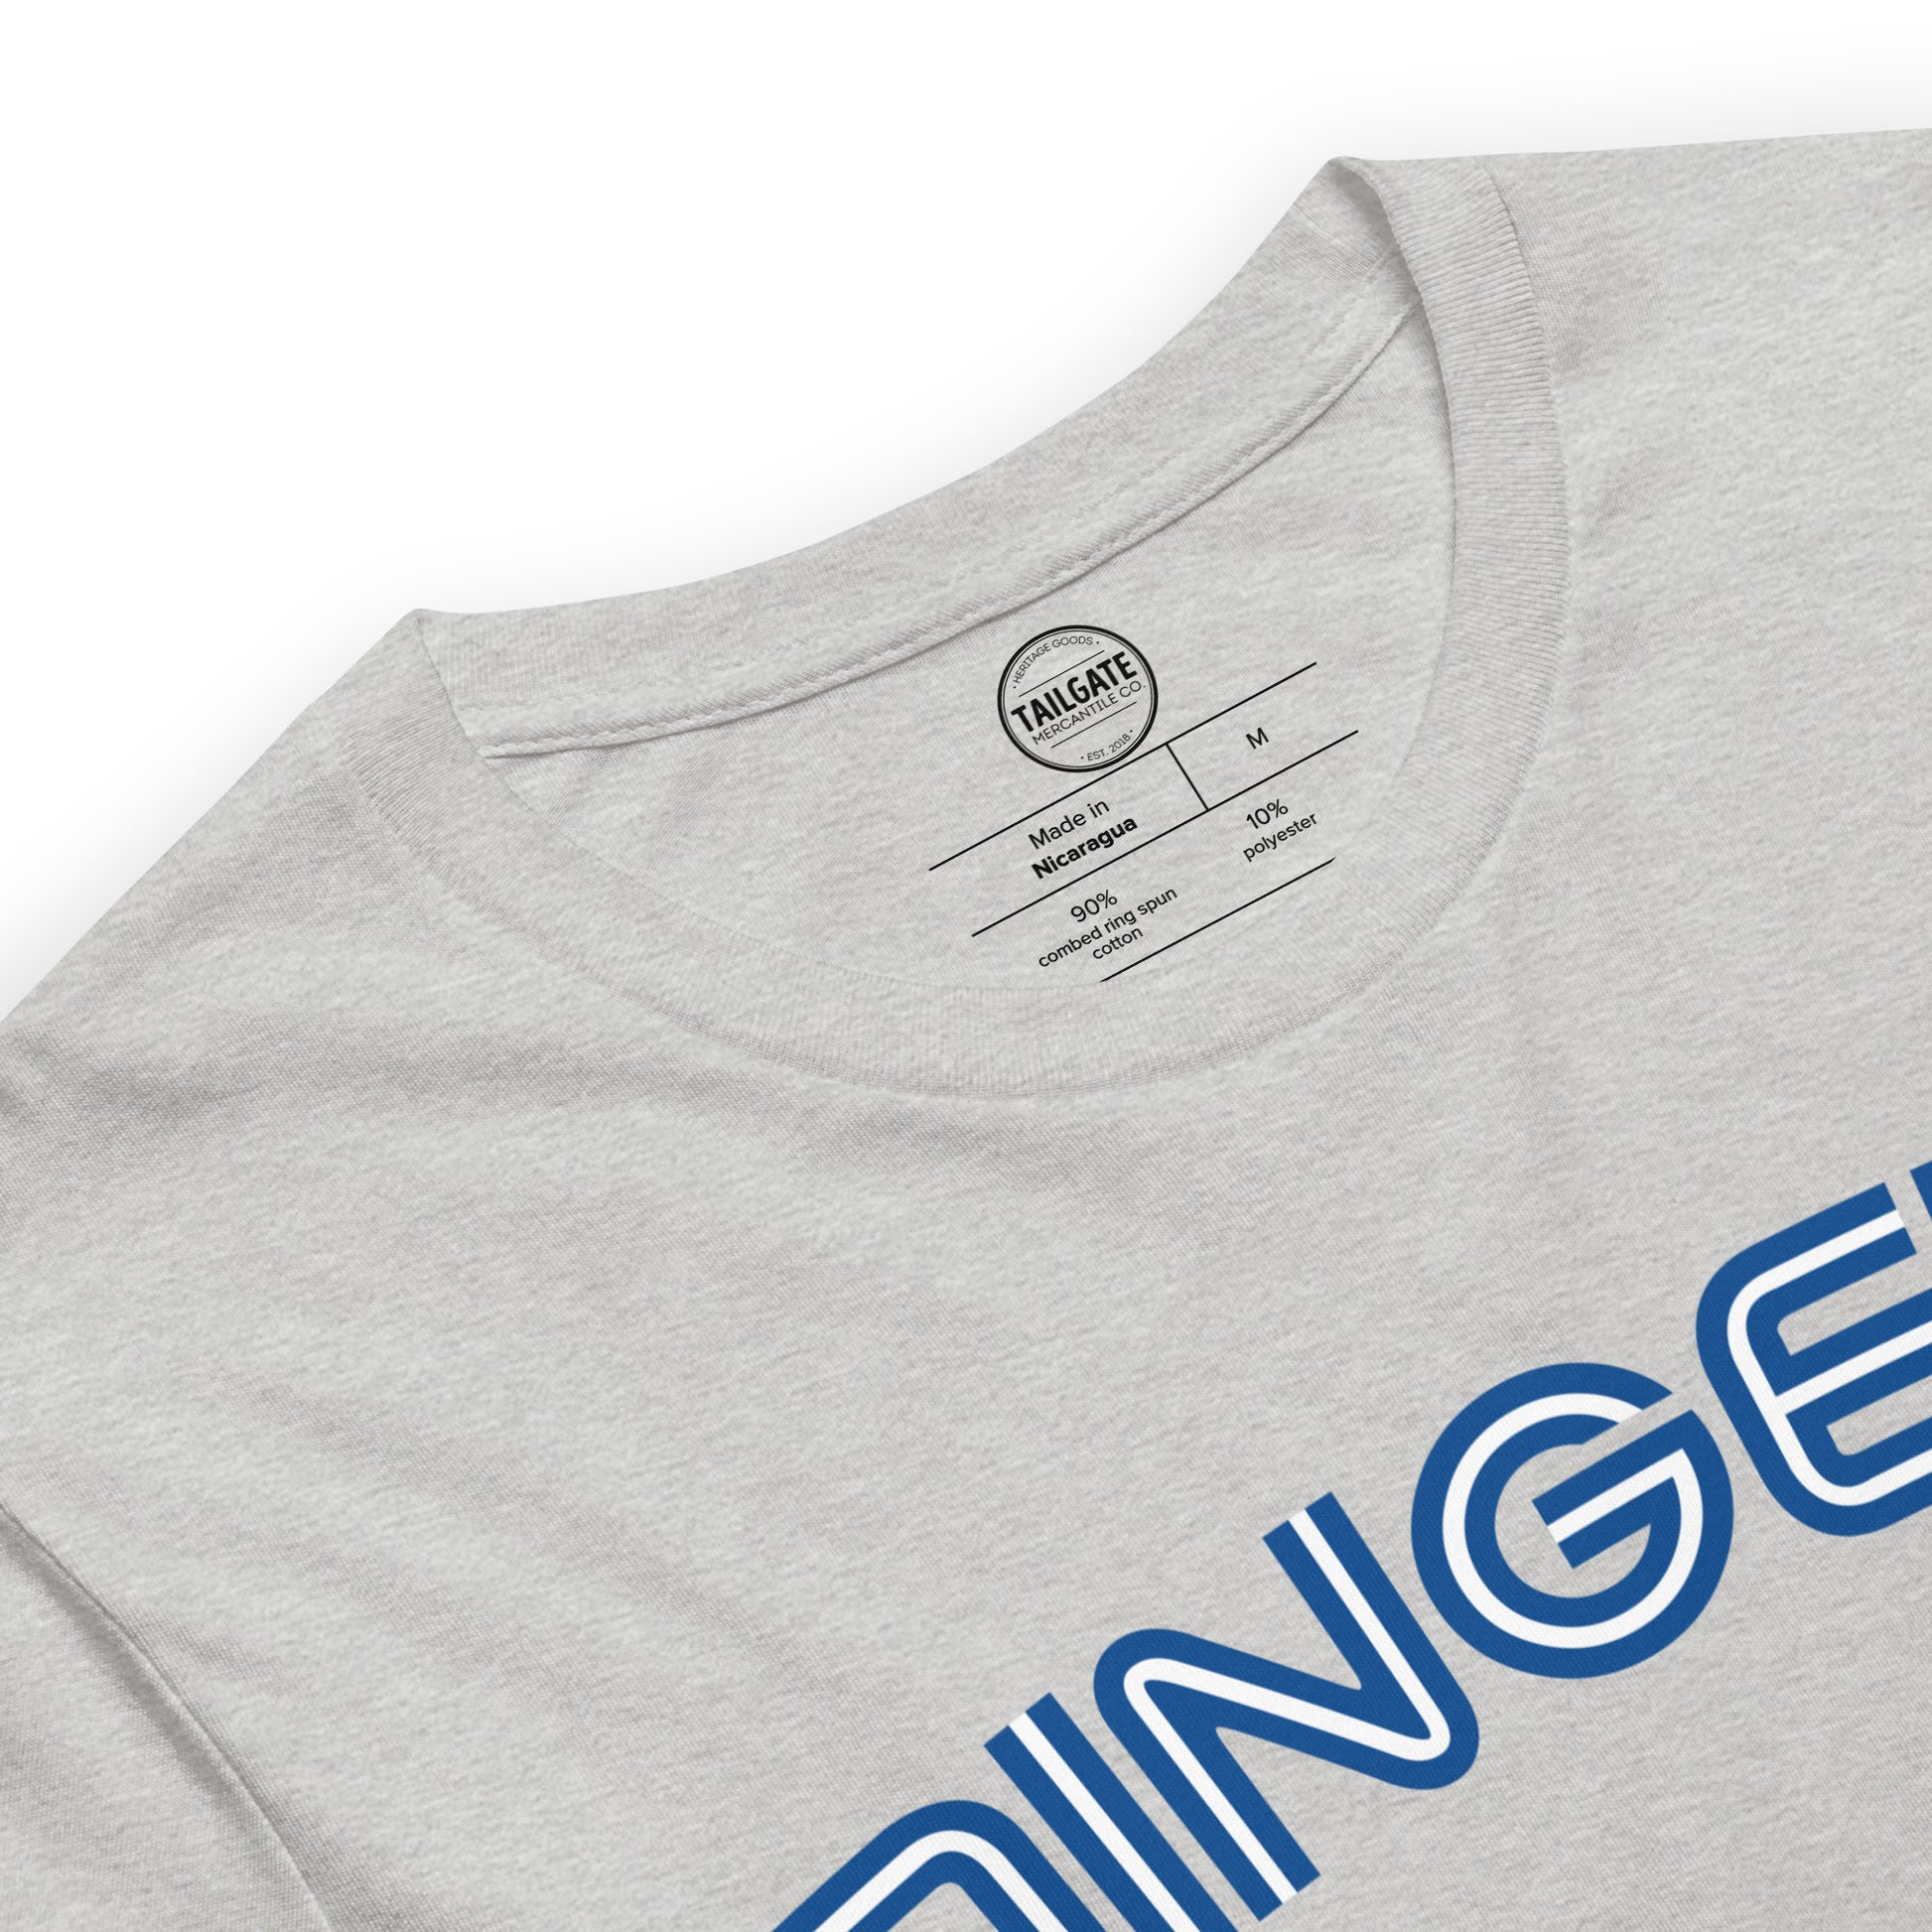 Close up image of heather athletic grey t-shirt with design of "DINGERS" in Toronto Blue Jays retro blue style font located on centre chest. Neck tag information also included in image. This design is exclusive to Tailgate Mercantile and available only online.